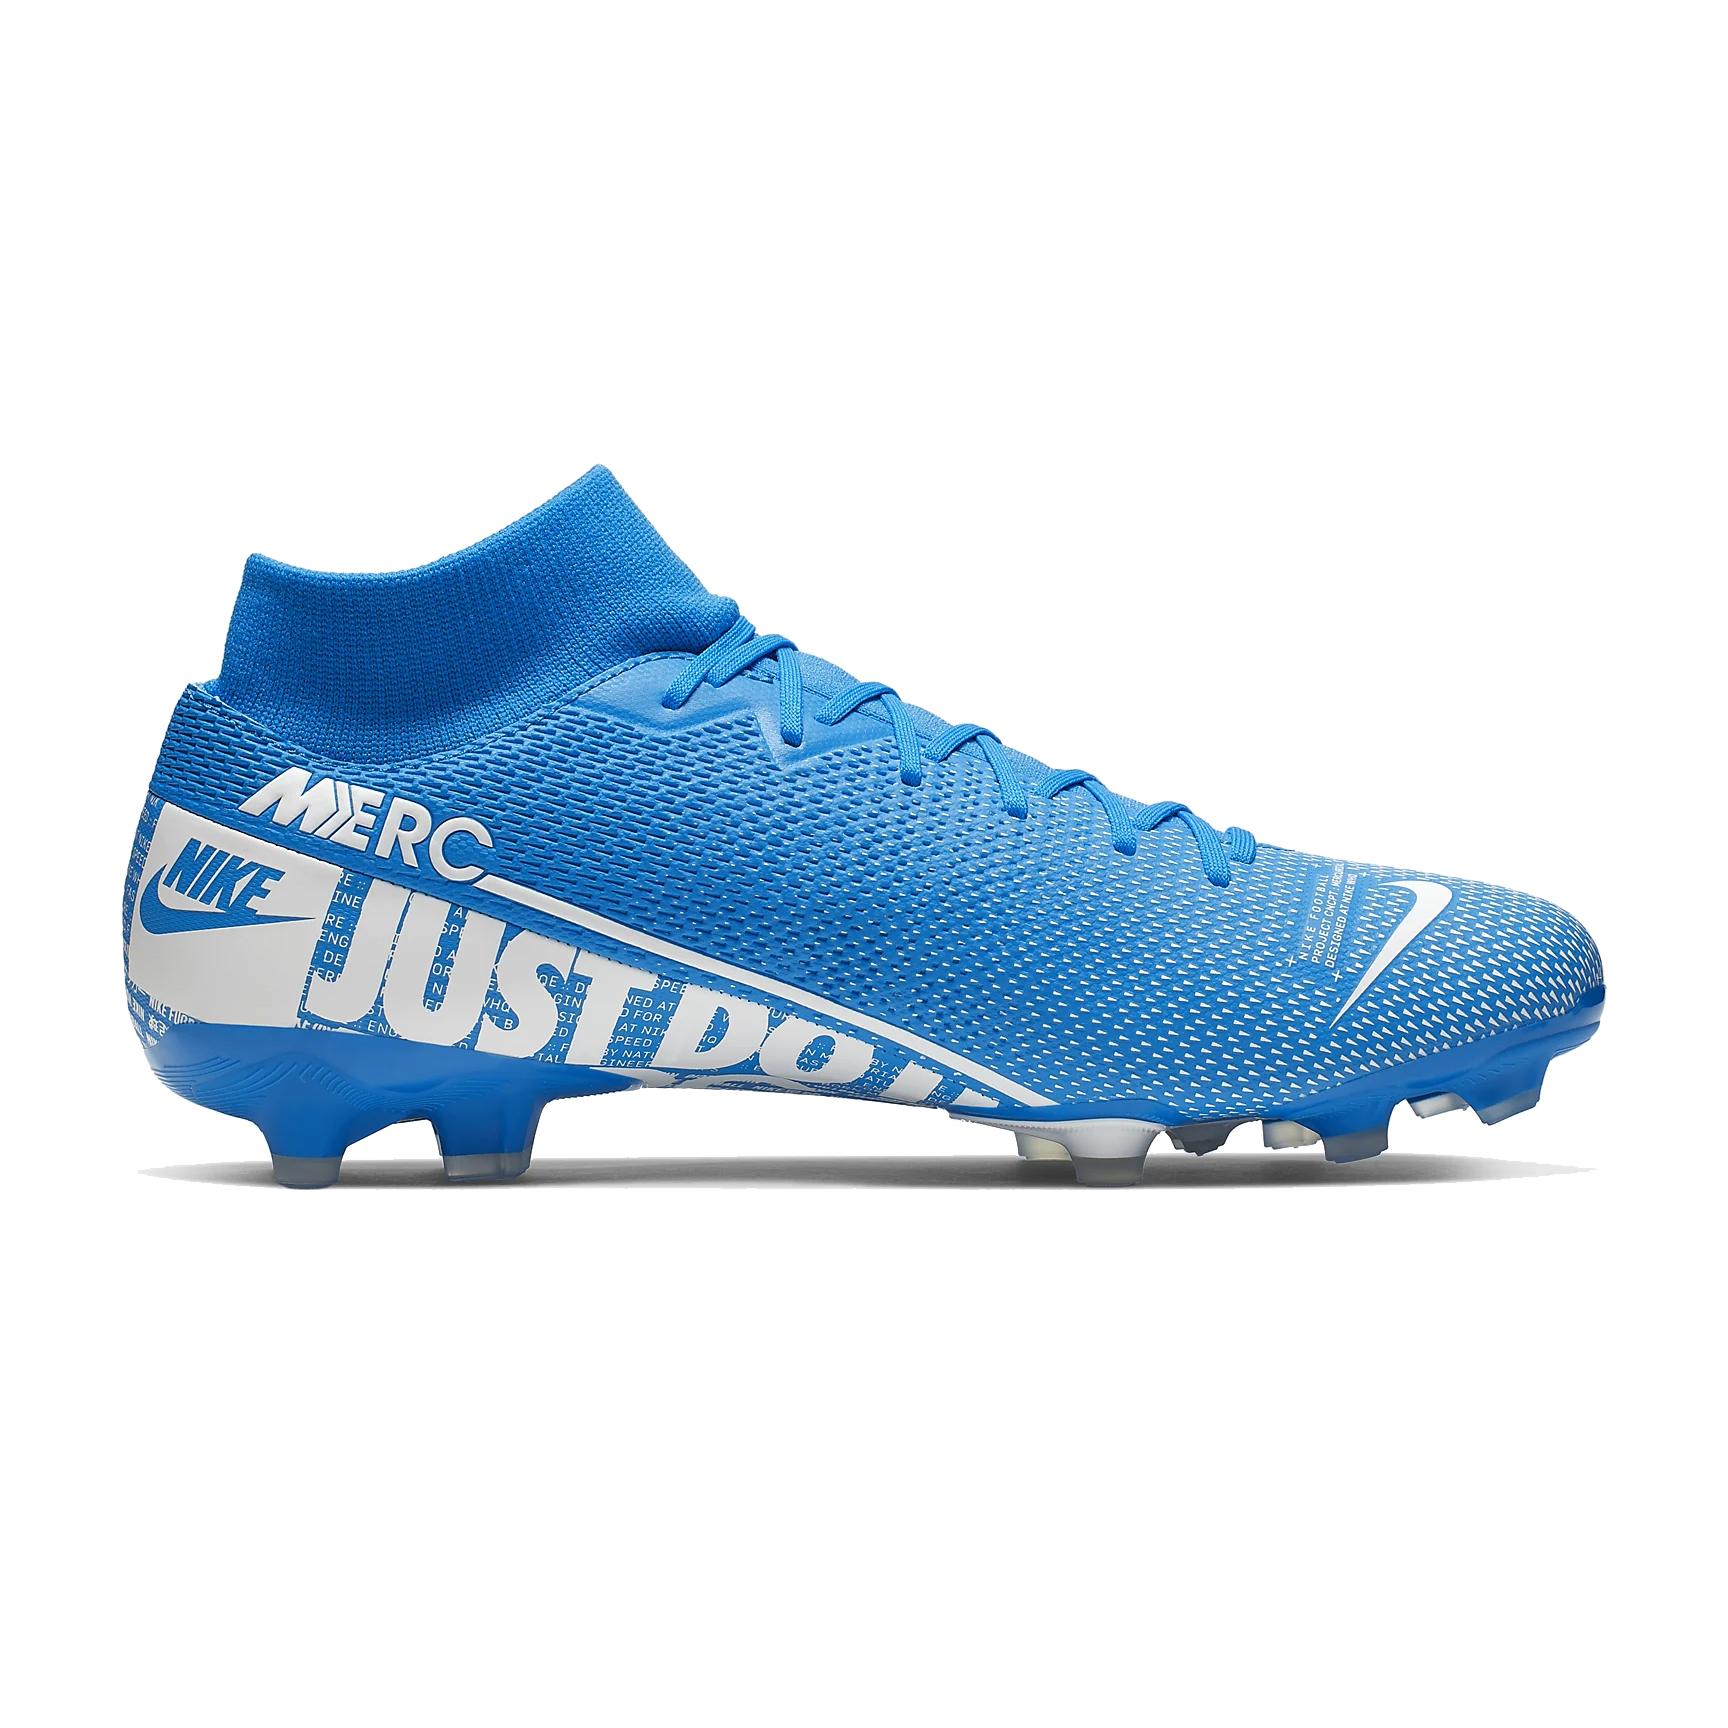 Mercurial Superfly 7 Pro Firm Ground Football Boots Mens